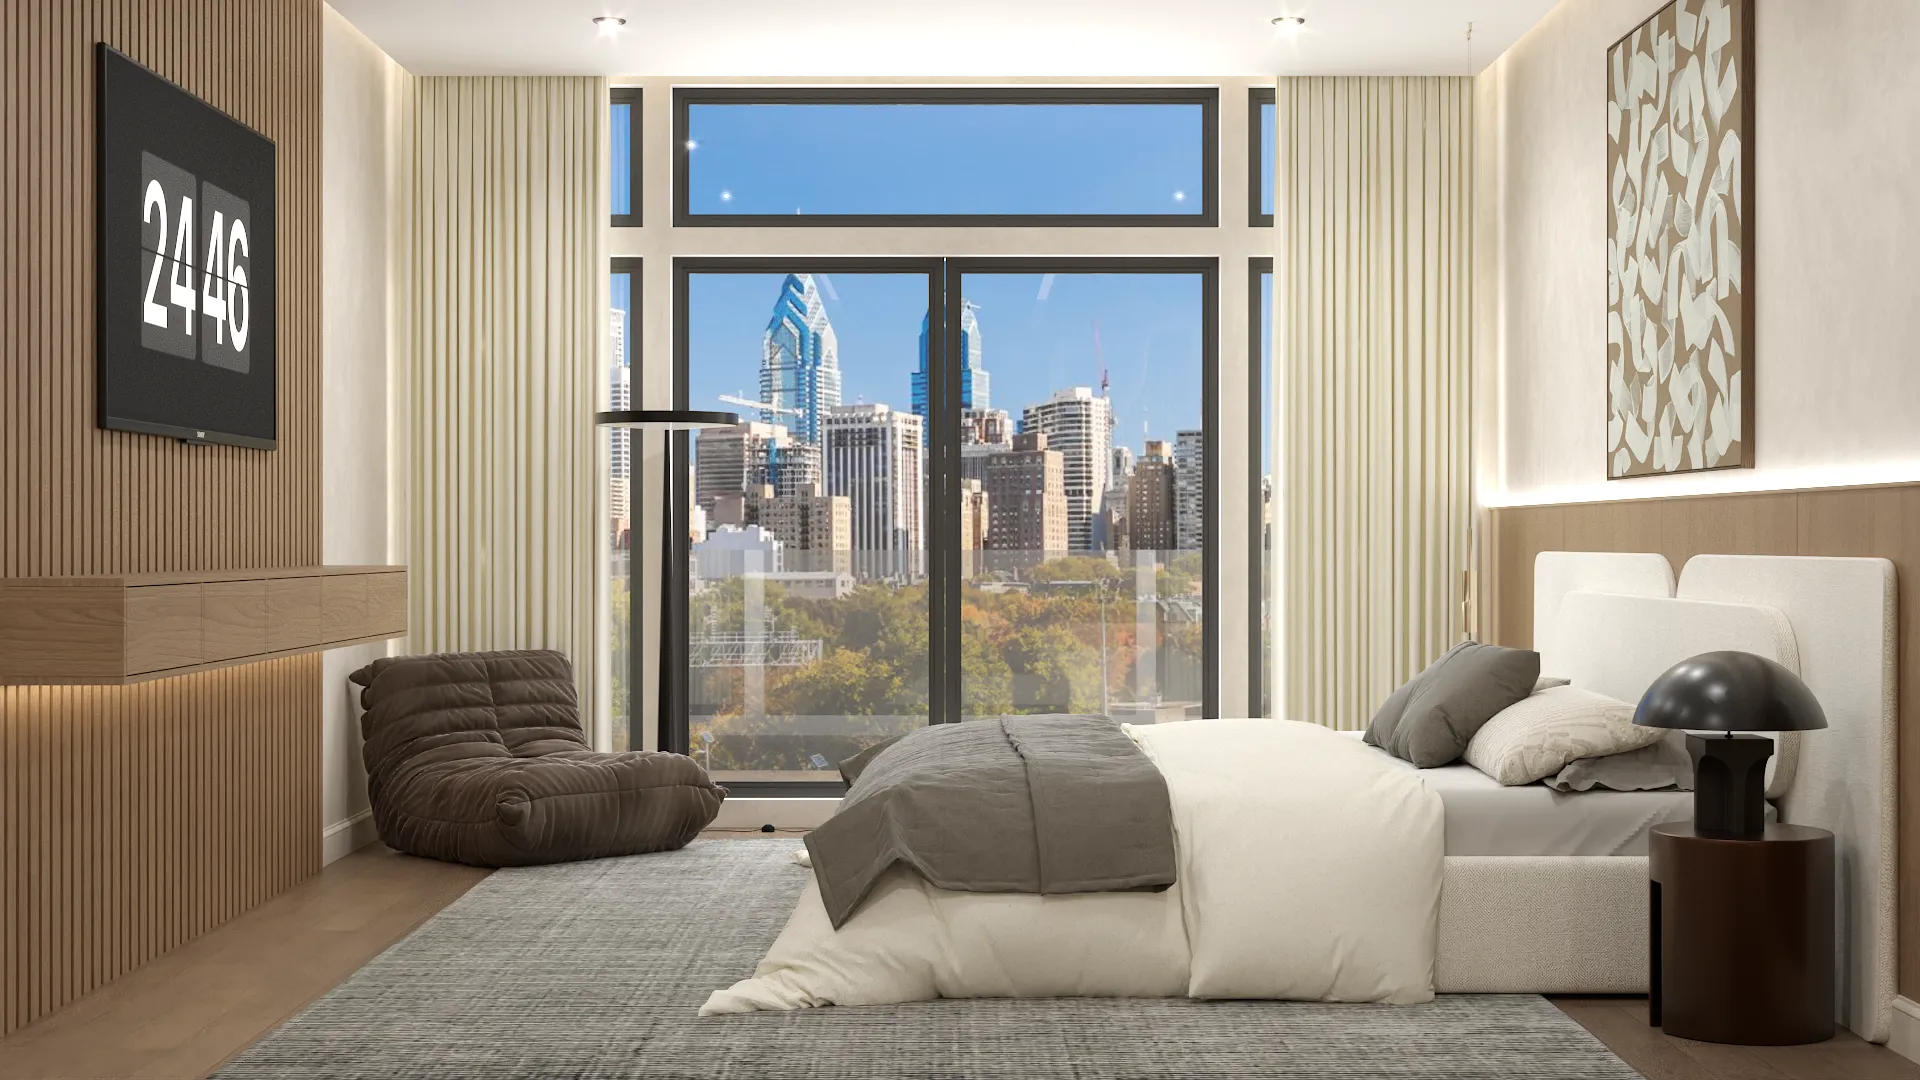 Modern bedroom with expansive New York City views through large windows, featuring a minimalist design and a neutral color palette that enhances the urban atmosphere. Design by Debora, an online interior design service.